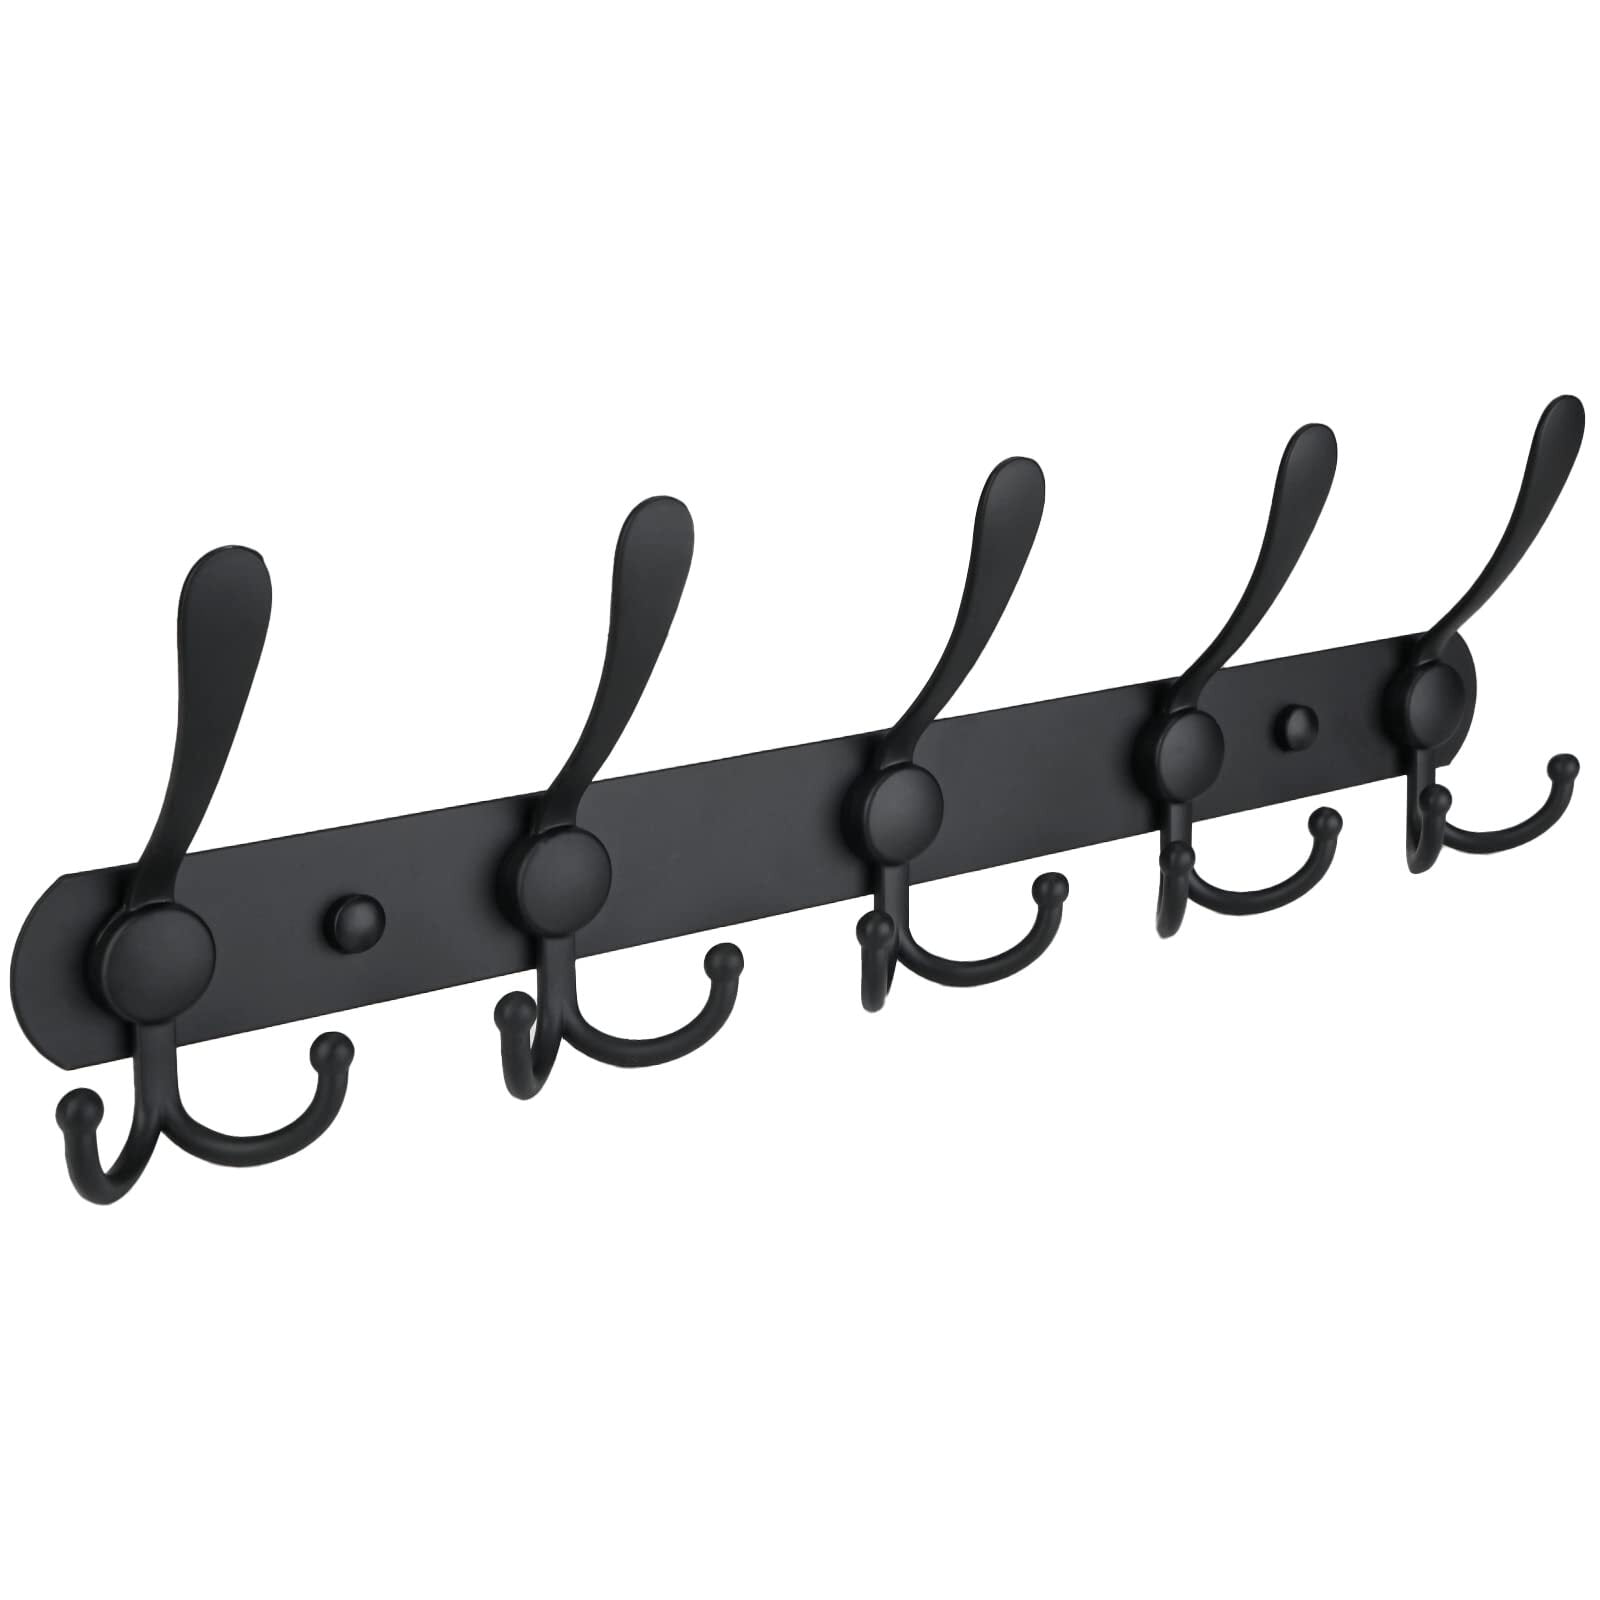 Wall Mounted Coat Rack, Five Heavy Duty Tri Hooks All Metal Construction  for Jacket Coat Hat in Mudroom Entryway (Black, 1-Pack) 